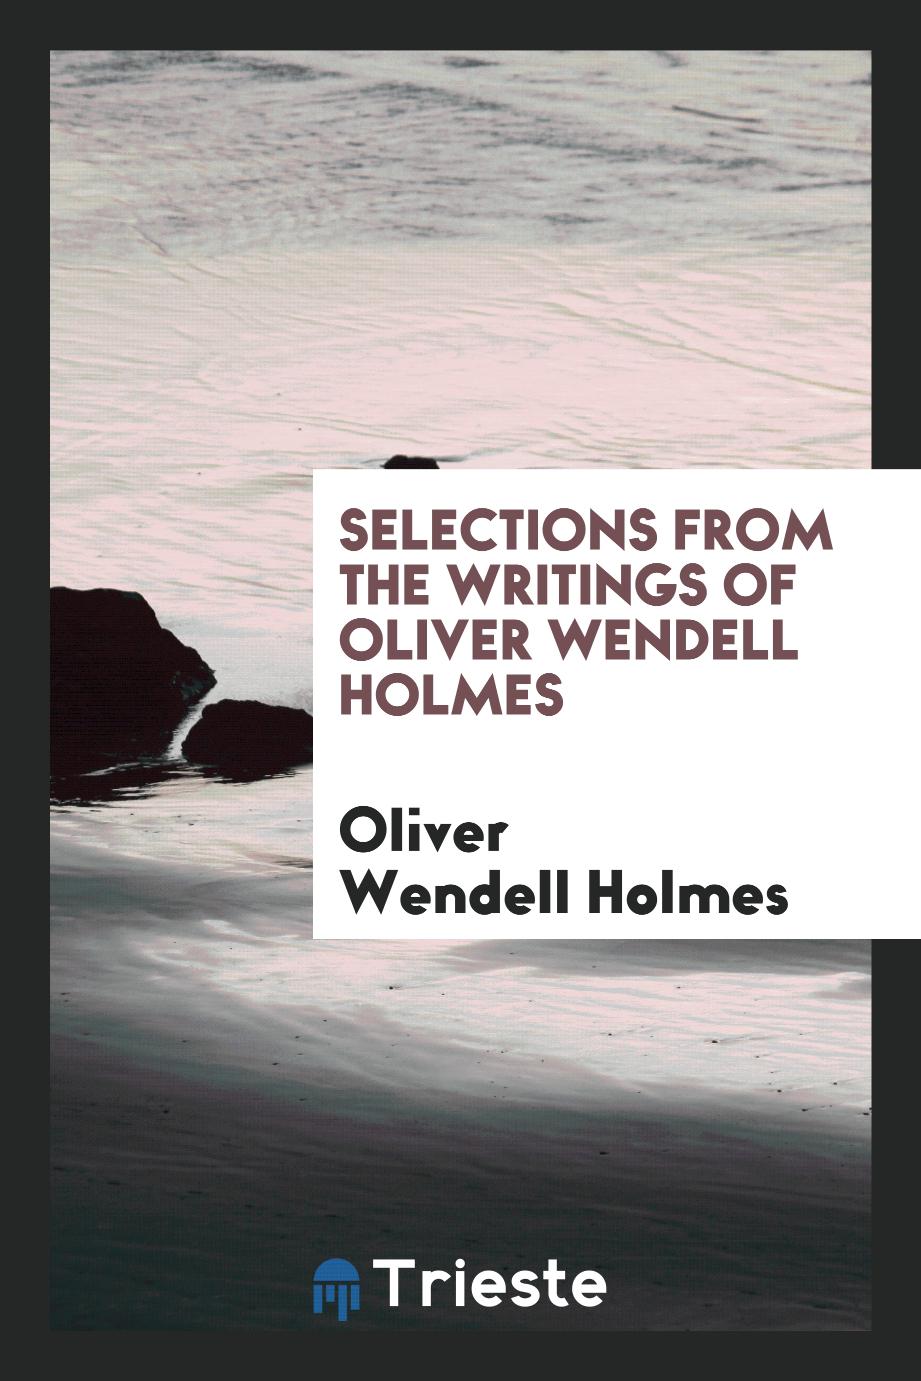 Selections from the writings of Oliver Wendell Holmes